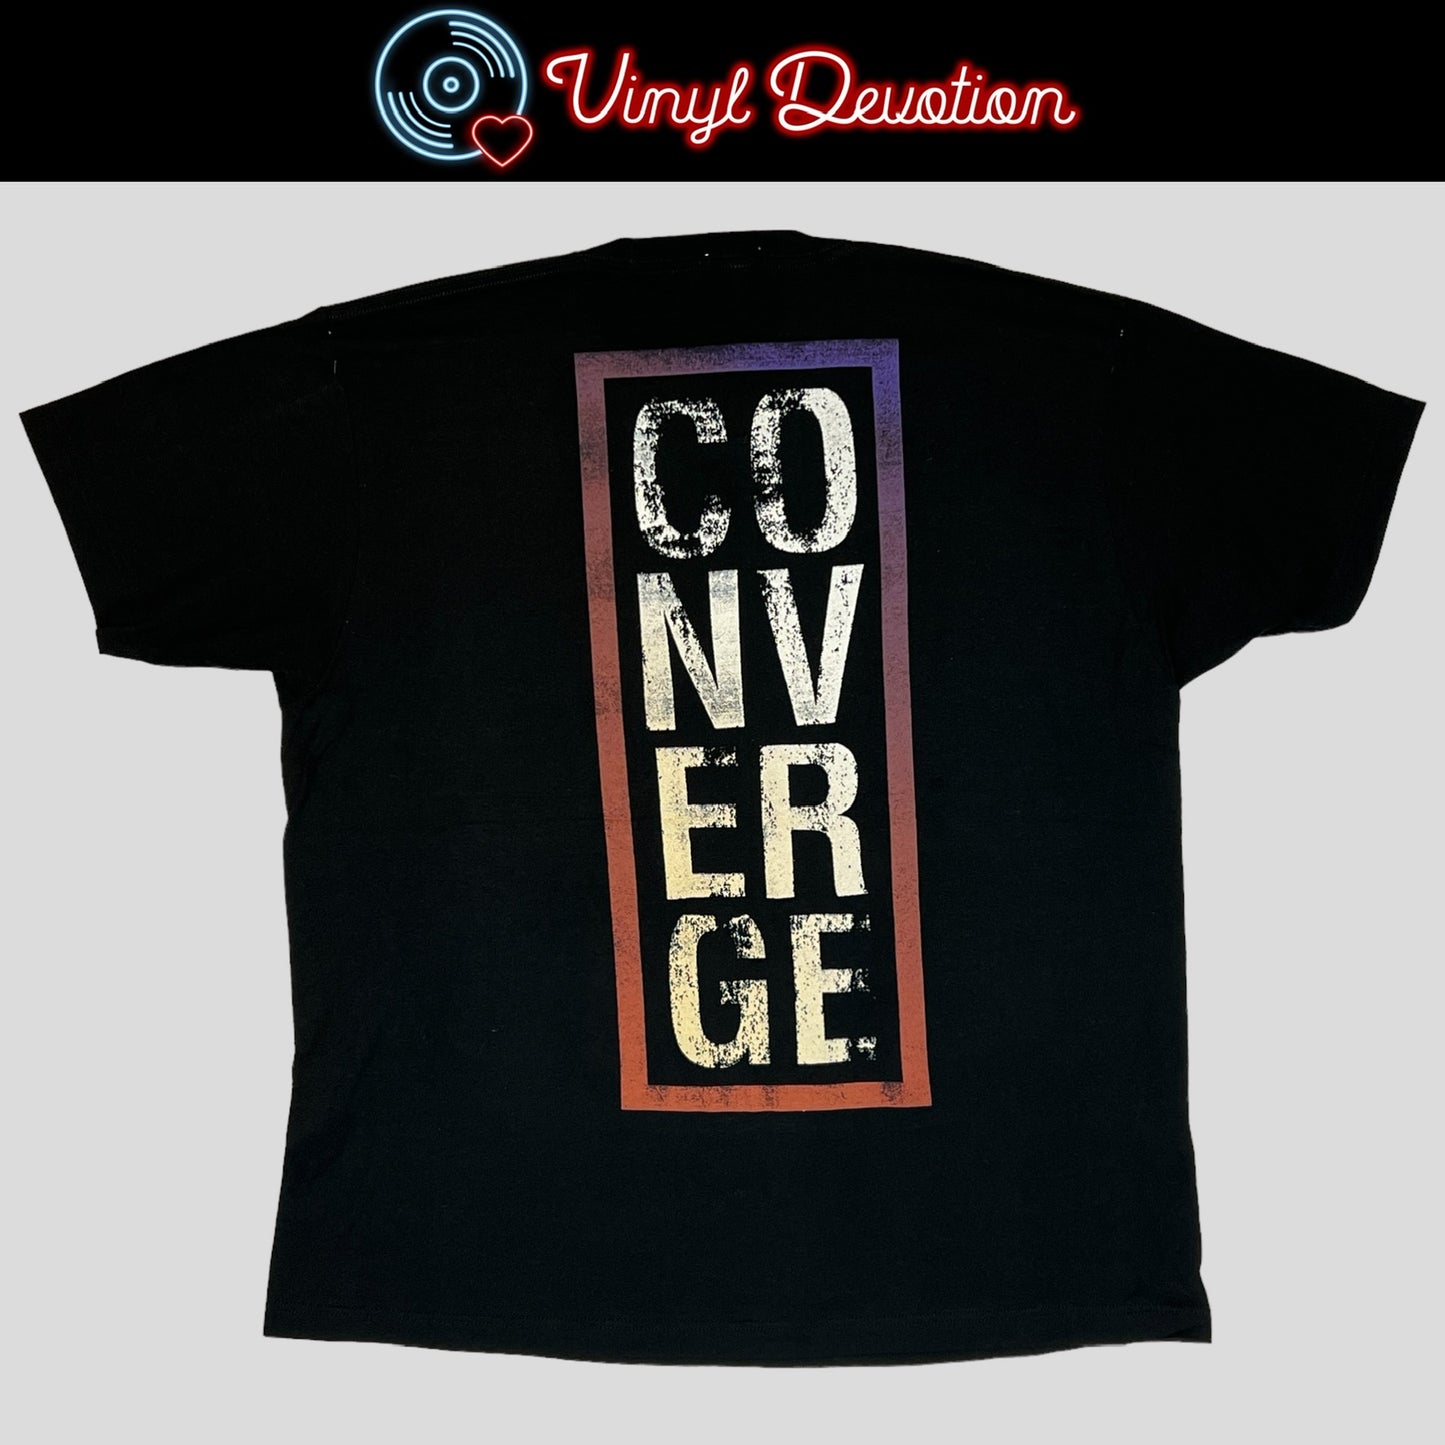 Converge - I Can Tell You About Pain T-Shirt Size XL